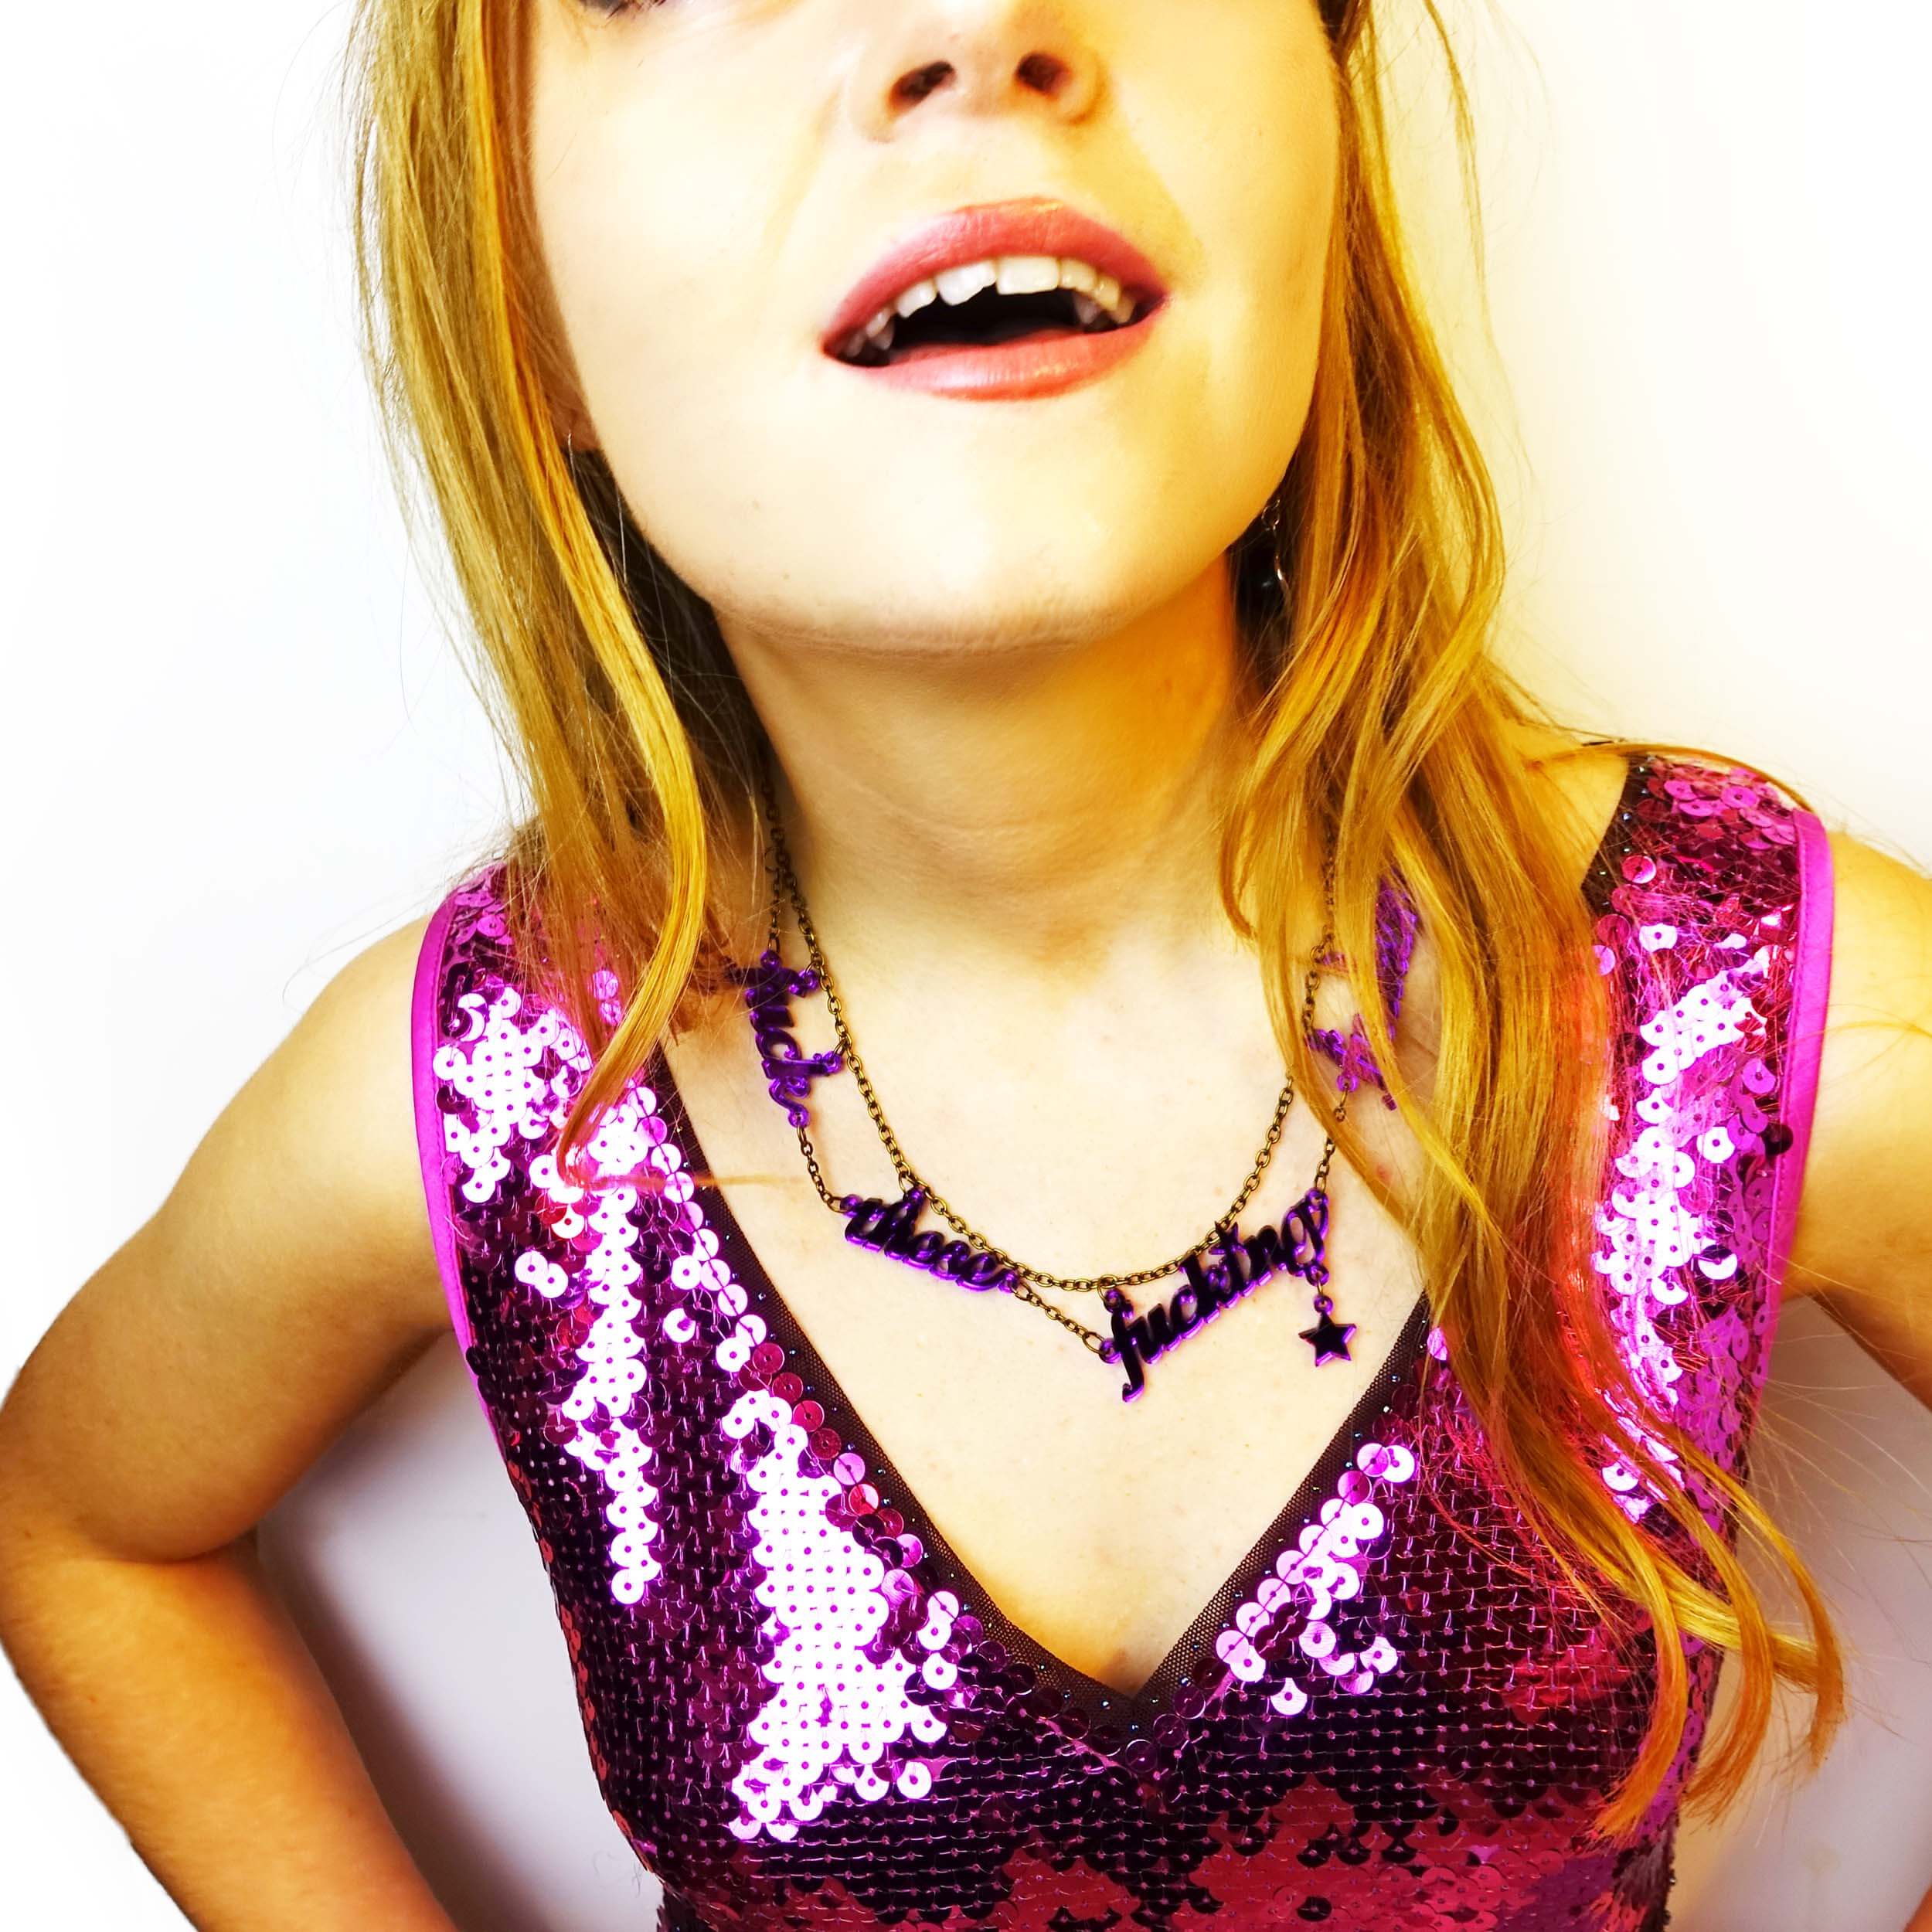 Model wears F*ck These F*cking F*ckers necklace in Poison lies Purple designed by Sarah Day the founder of Wear and Resist. 